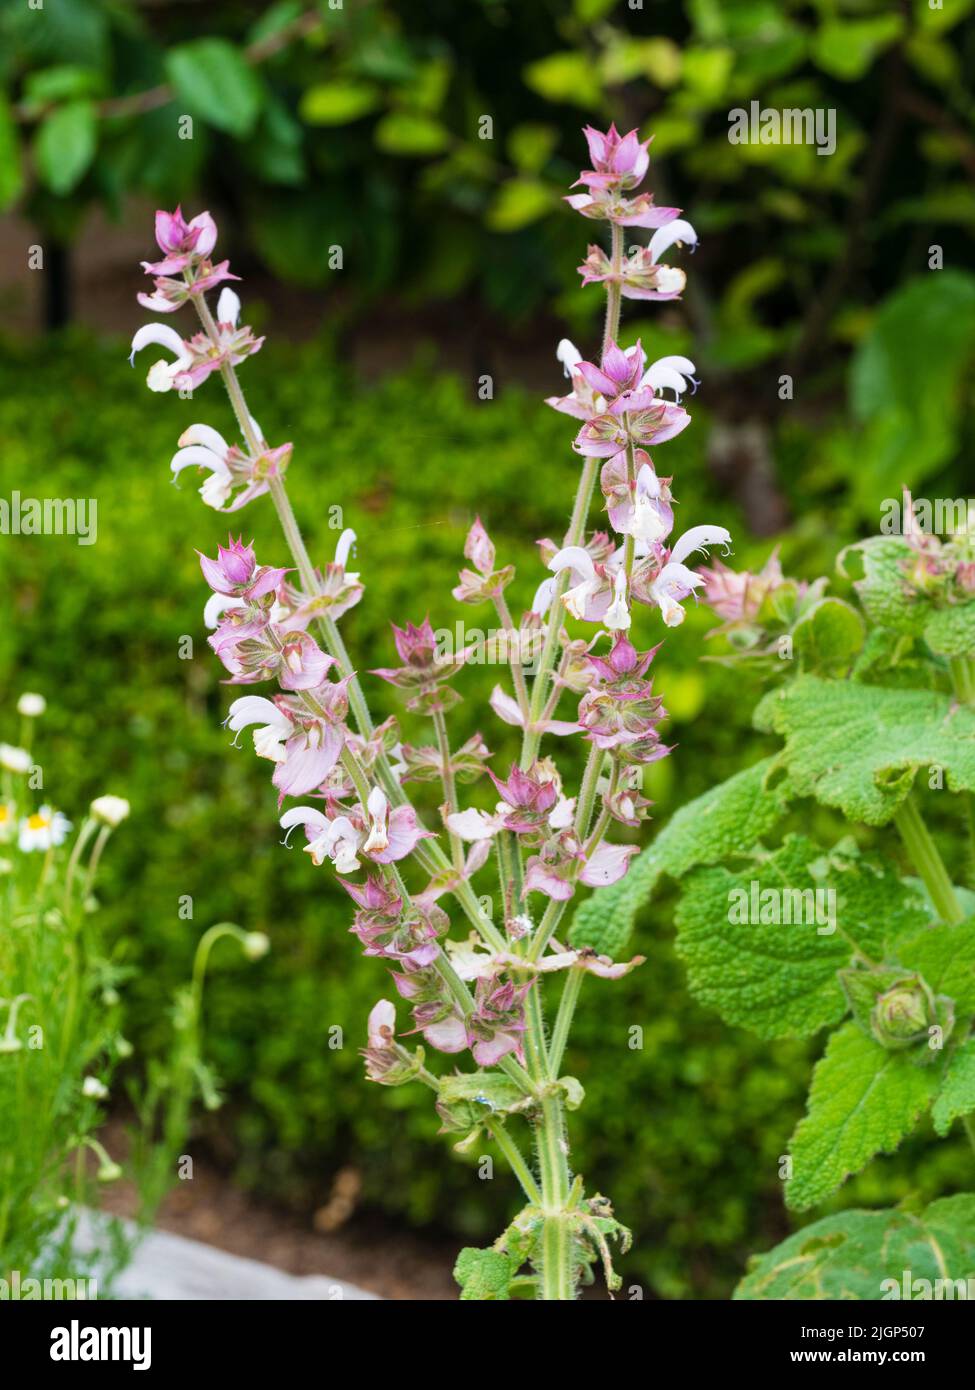 White blooms and pink bracts of the summer flowering biennial medicinal herb Salvia sclarea, clary sage Stock Photo